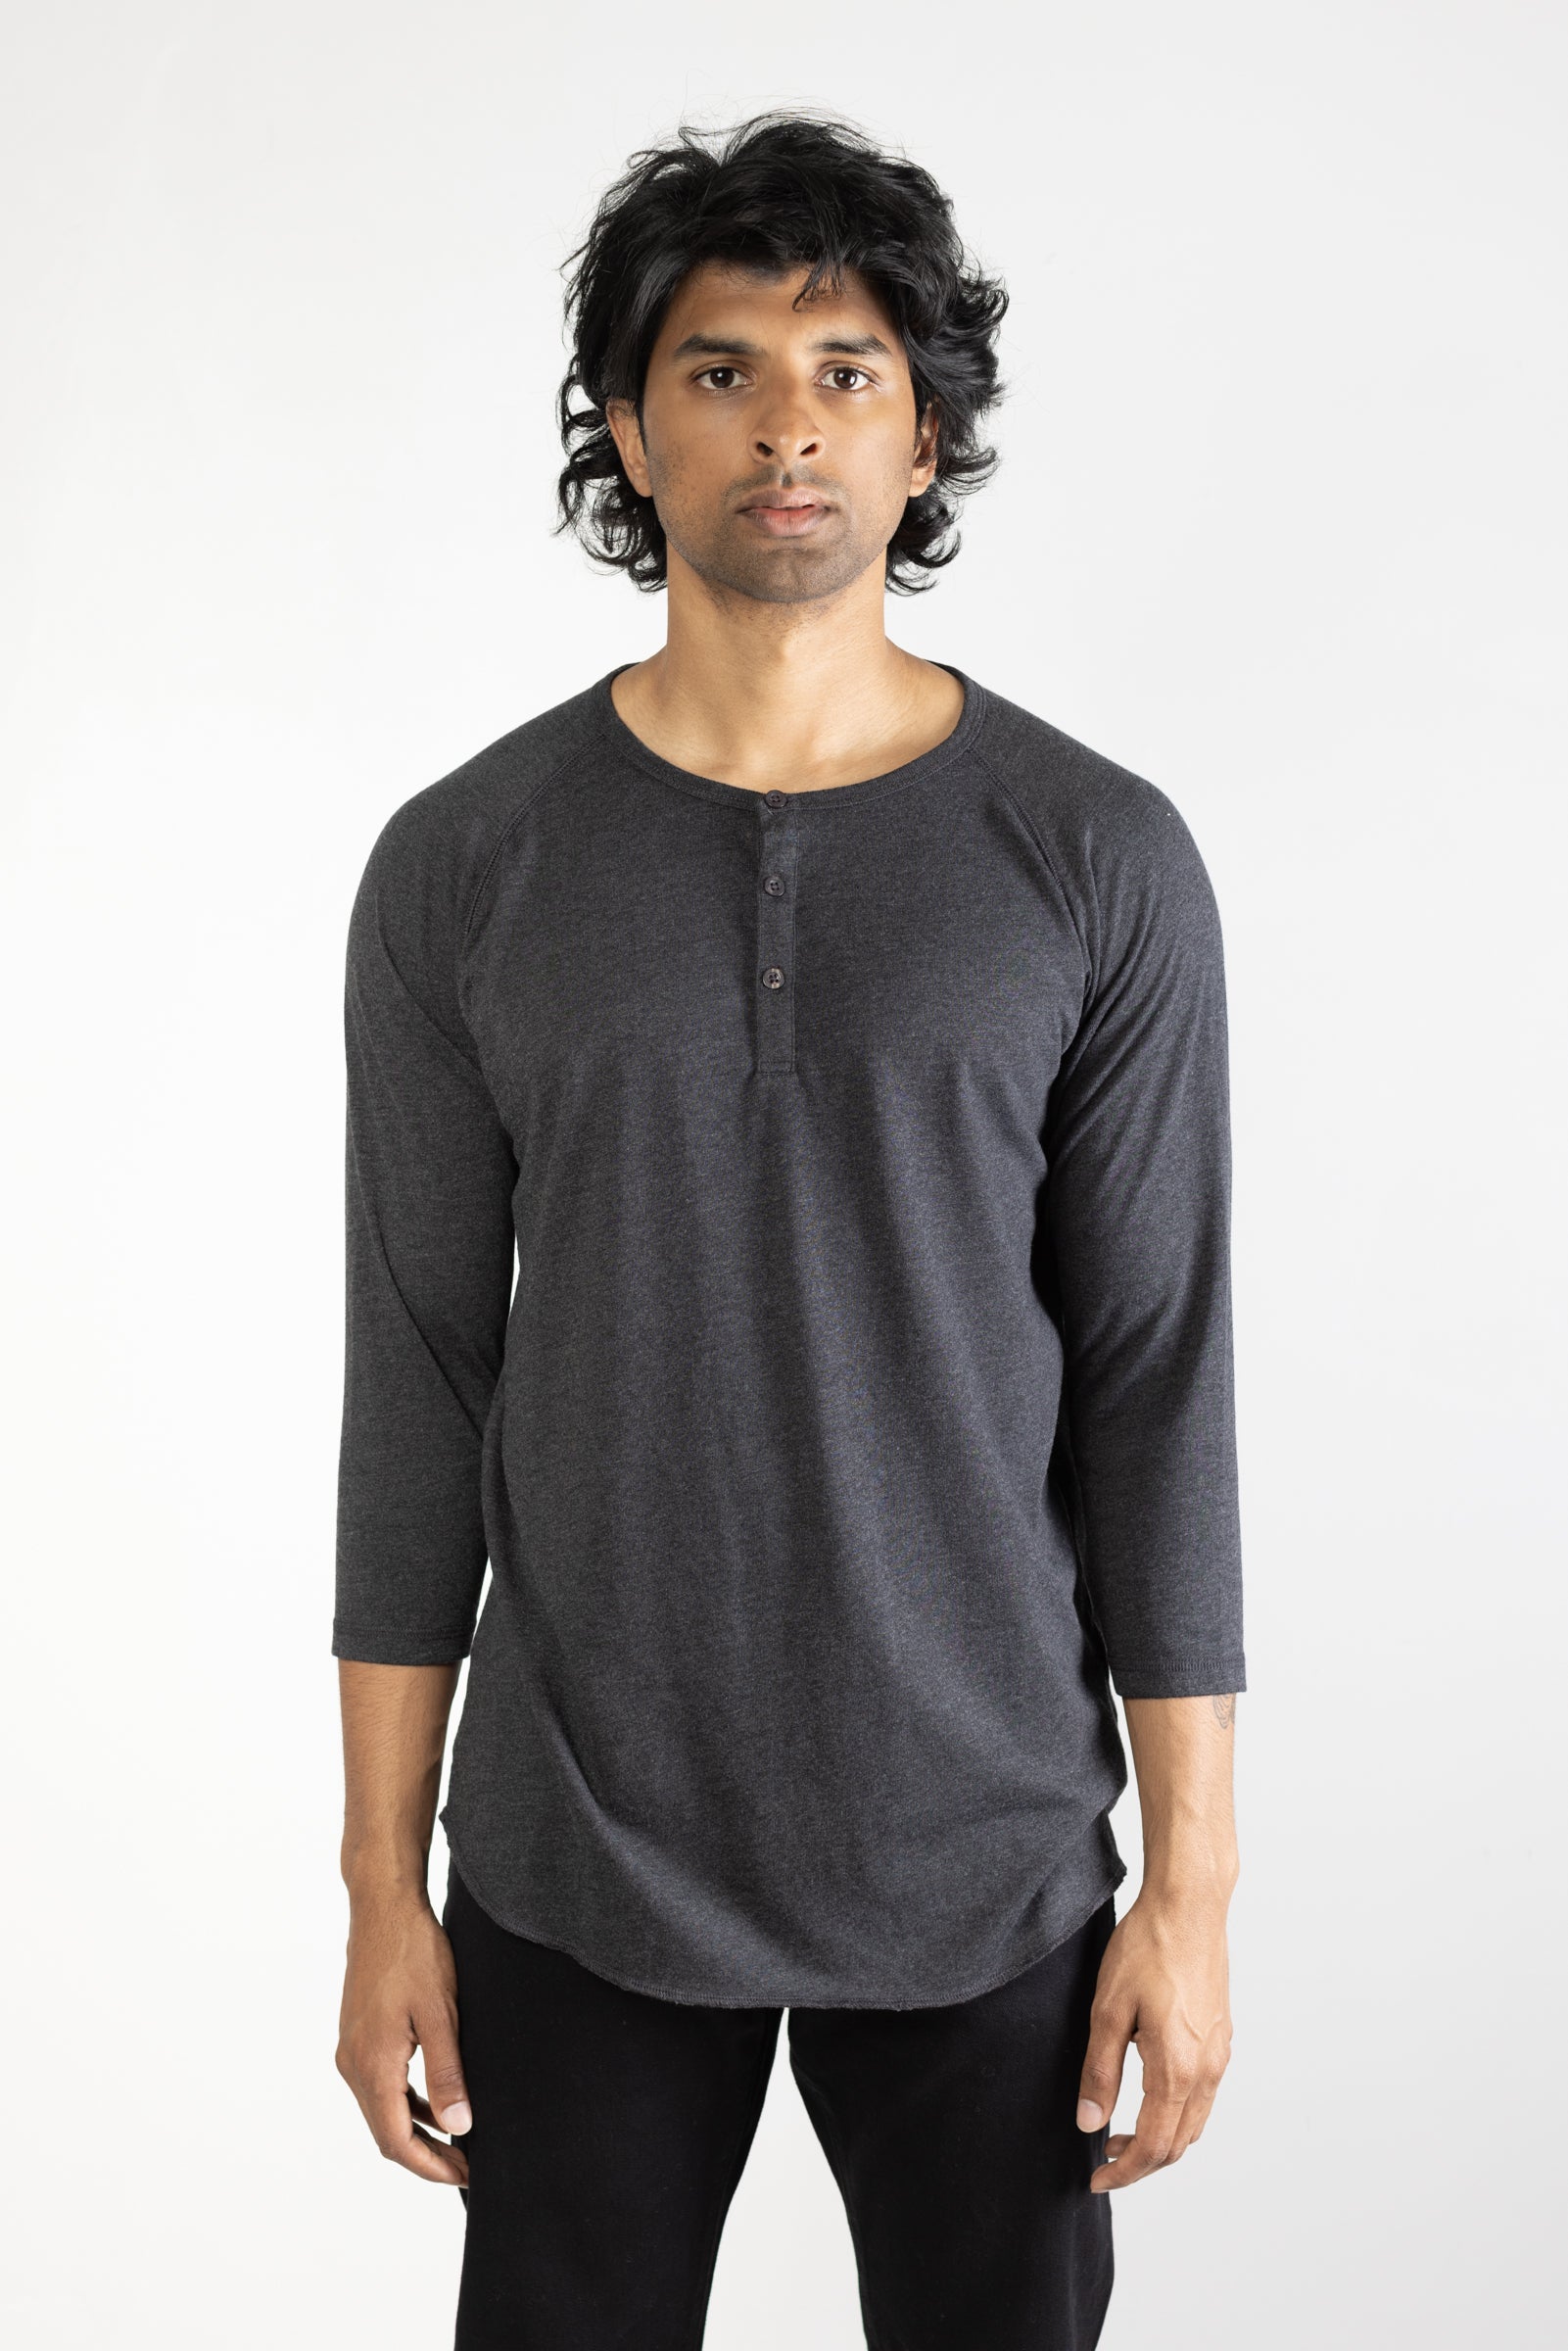 Tri Blend Henley in Charcoal 02